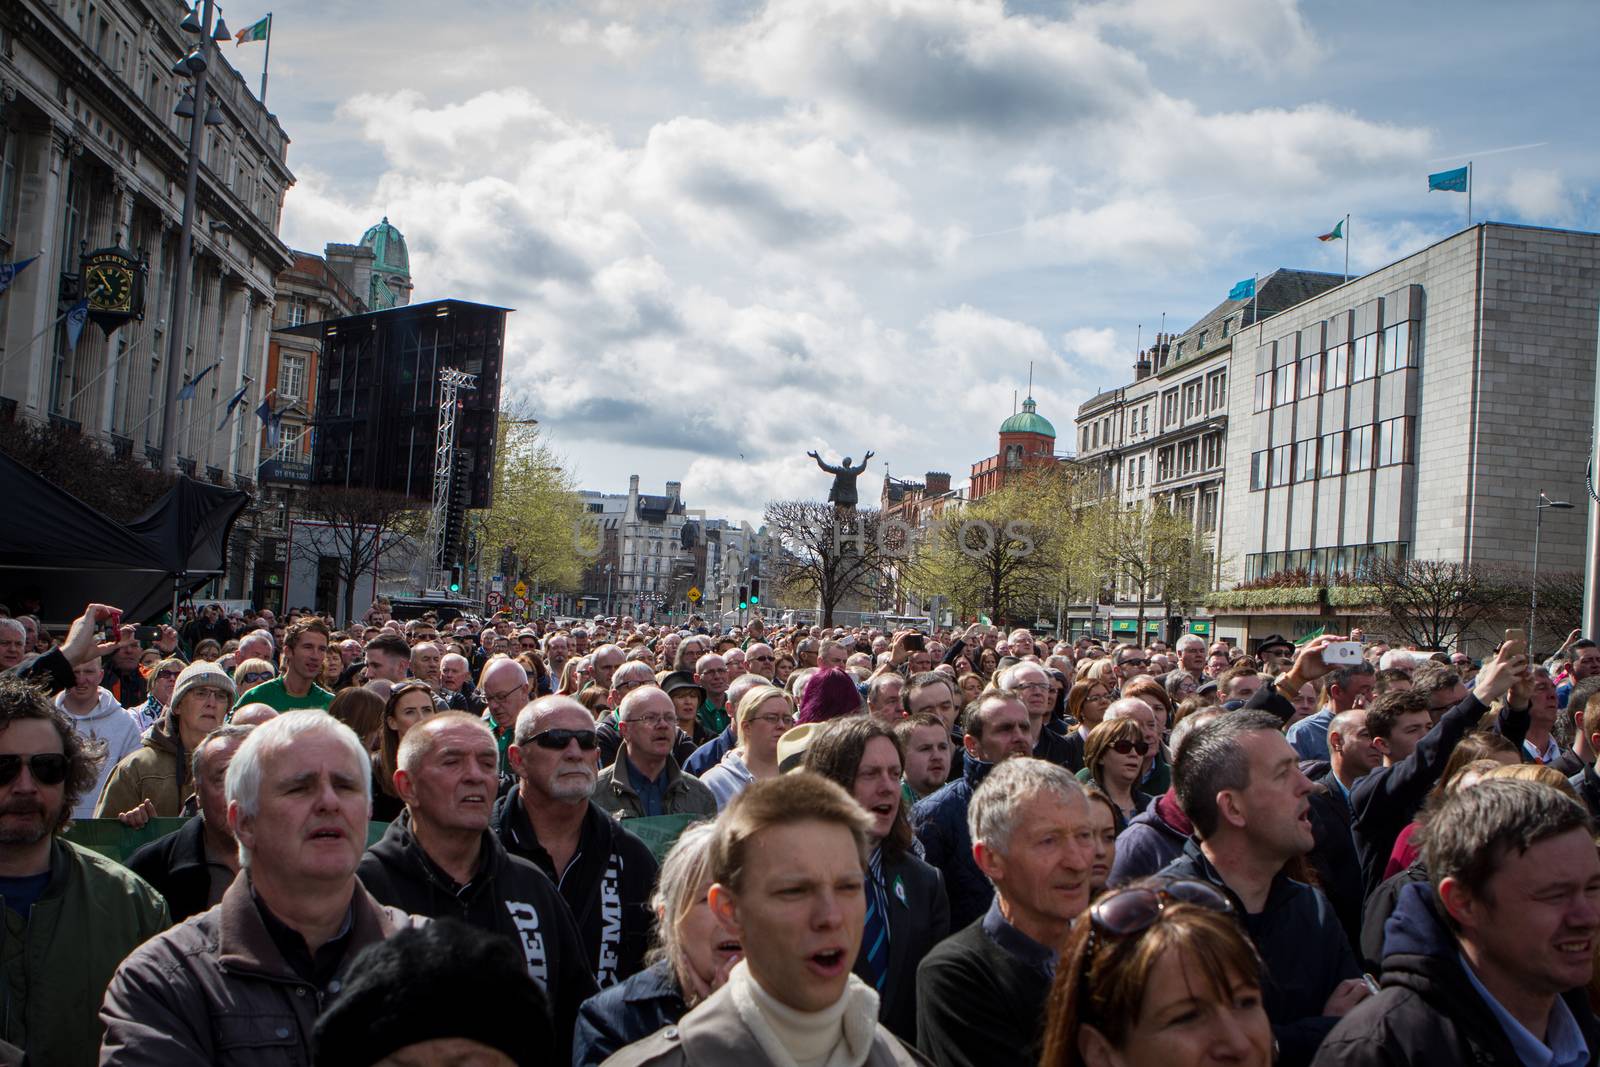 IRELAND, Dublin: Thousands demonstrate to commemorate the 100 year anniversary of the 1916 Easter Rising in front of the GPO General Post Office in central Dublin on April 24, 2016. Irish people has the opportunity to host a proper ceremony on behalf of all citizens that will pay proper tribute to the men and women of 1916 and to the Proclamation of the Irish Republic Thousand of people celebrate the big day in Ireland.